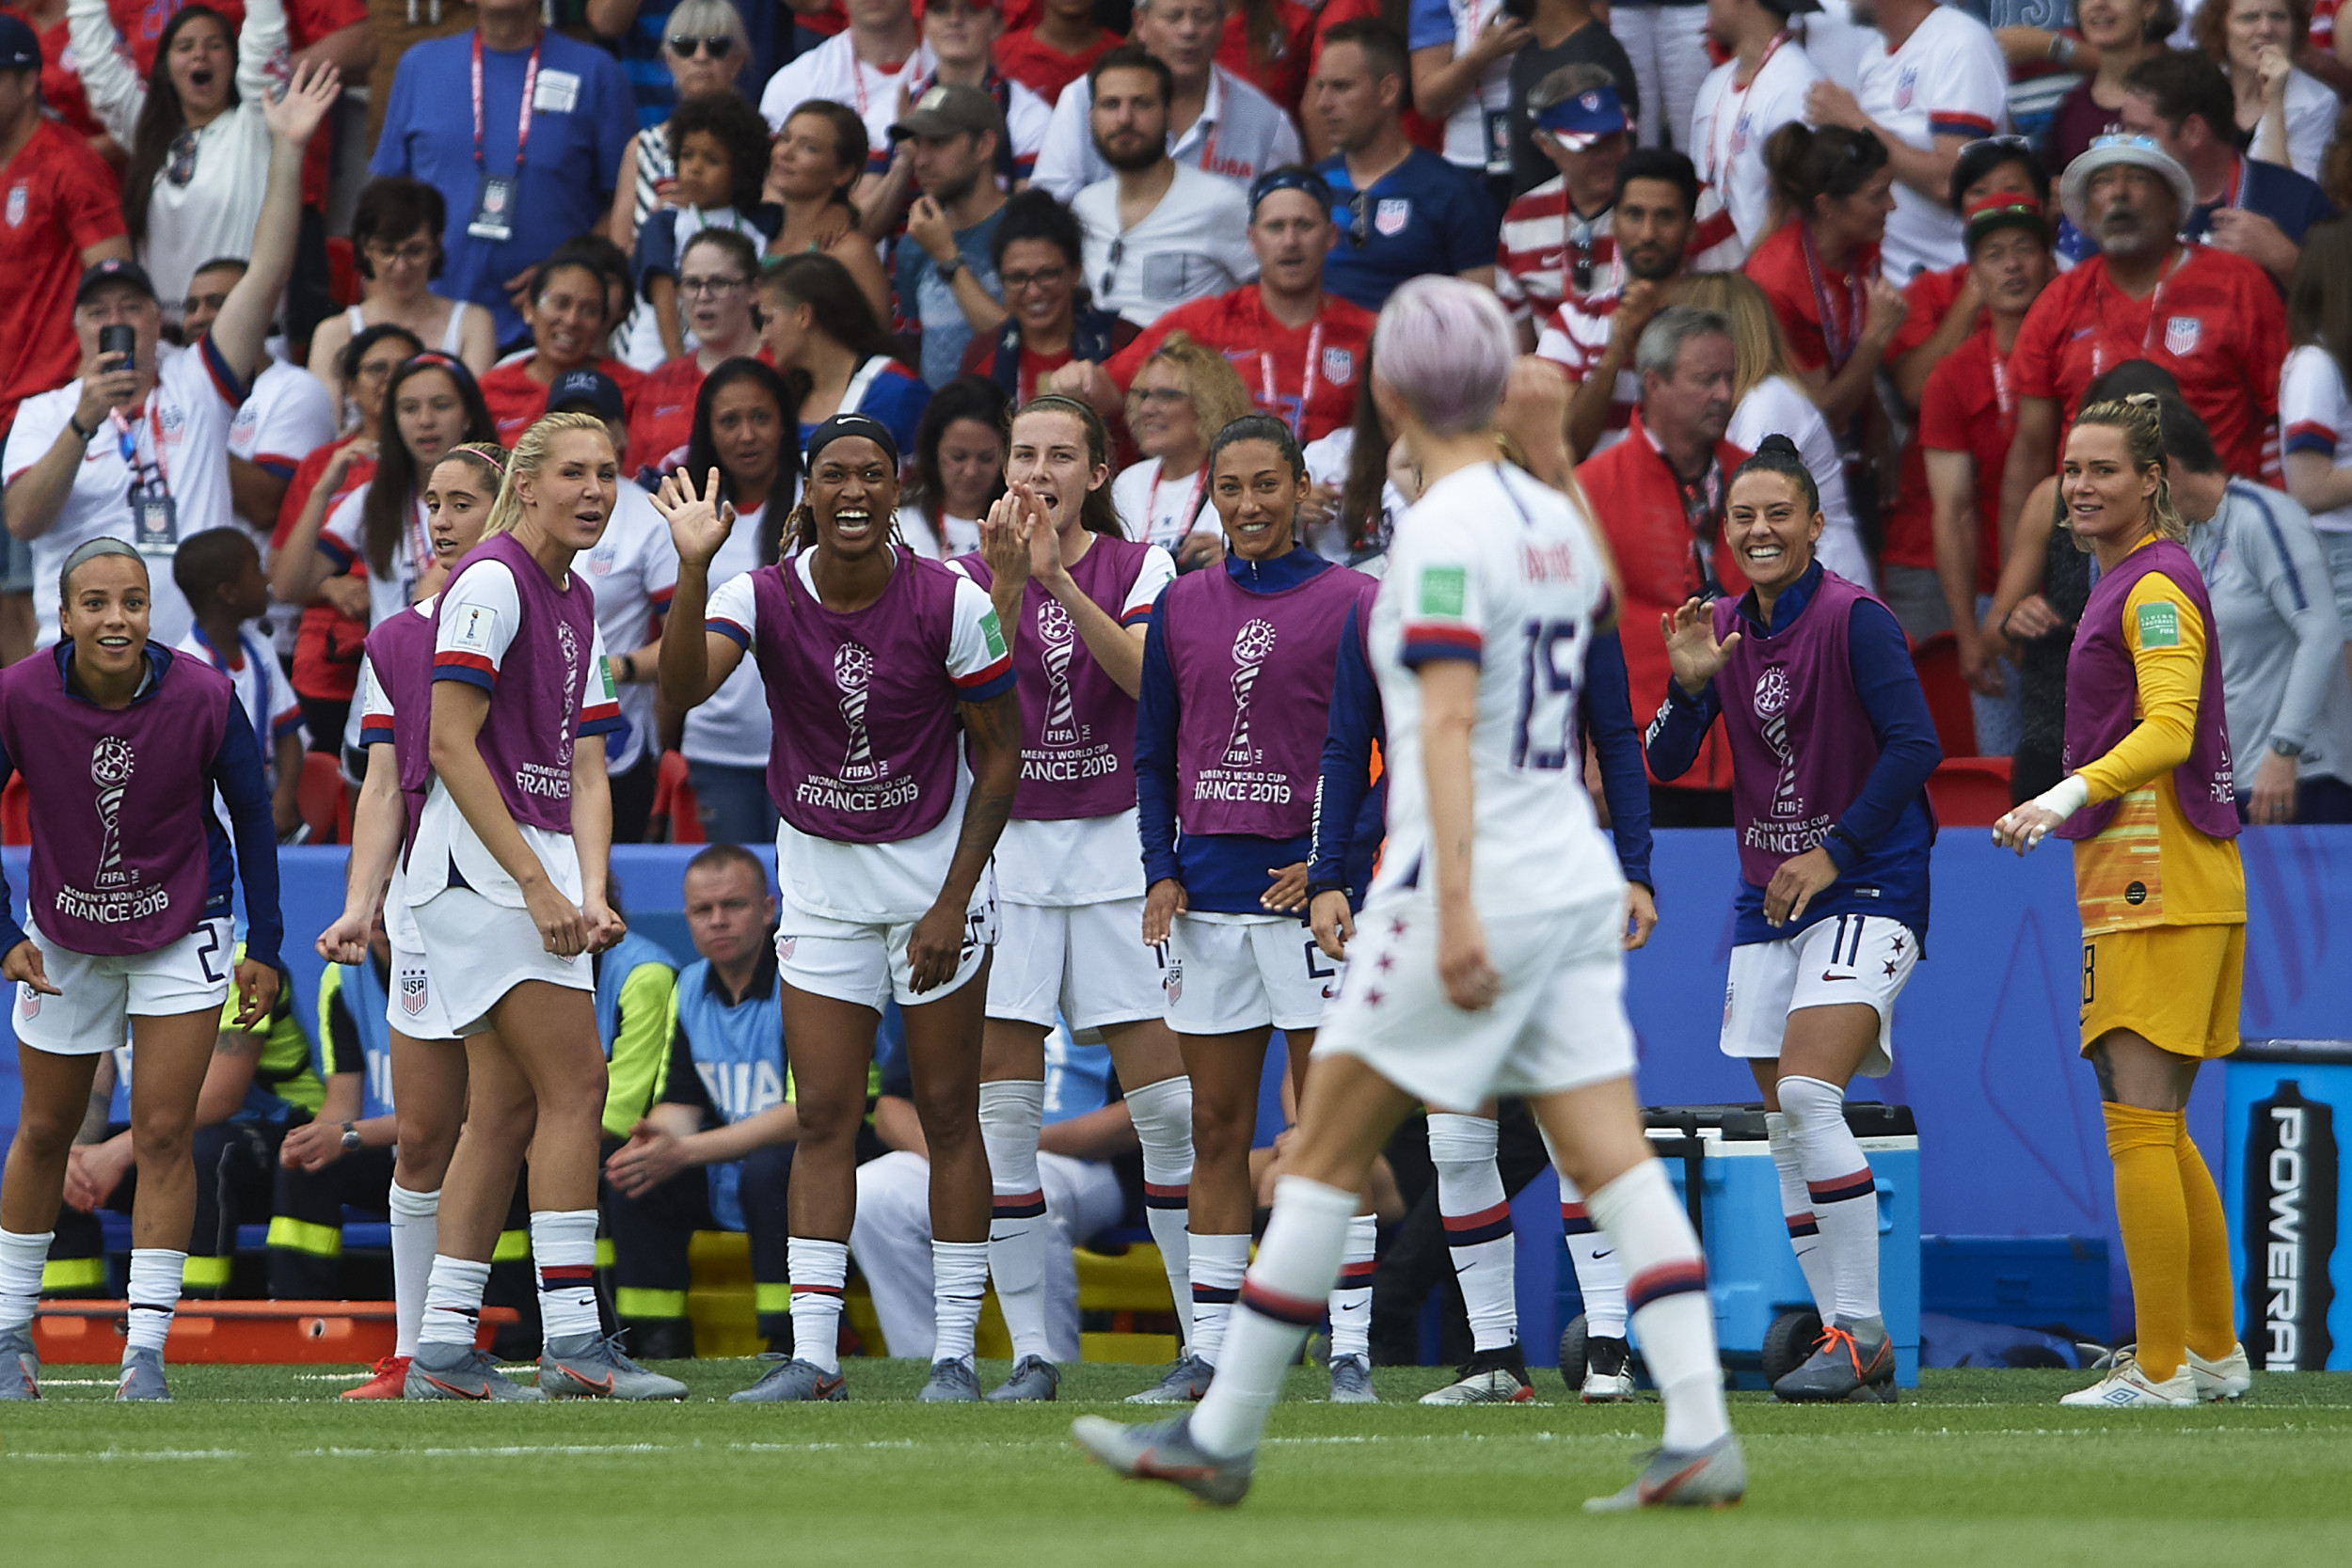 July 2019 Sports Events Women's World Cup, Gold Cup, Wimbledon, The